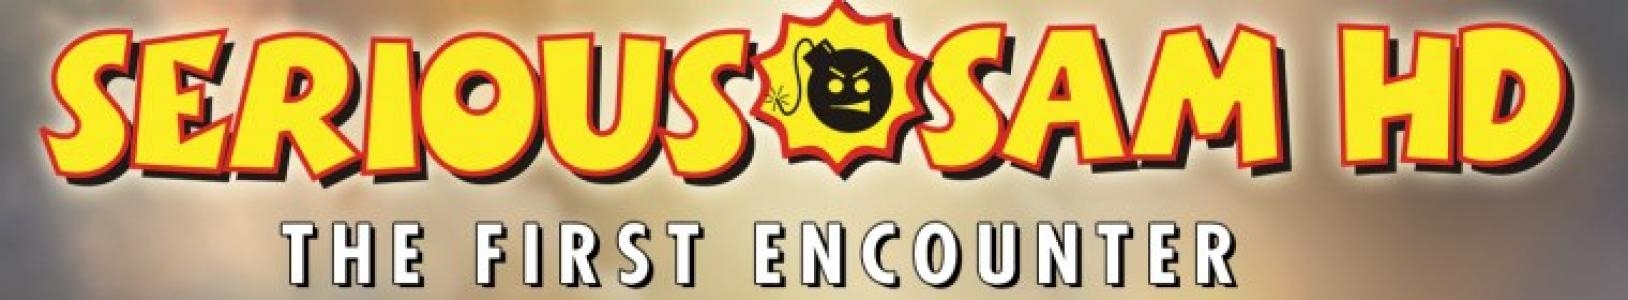 Serious Sam HD: The First Encounter banner